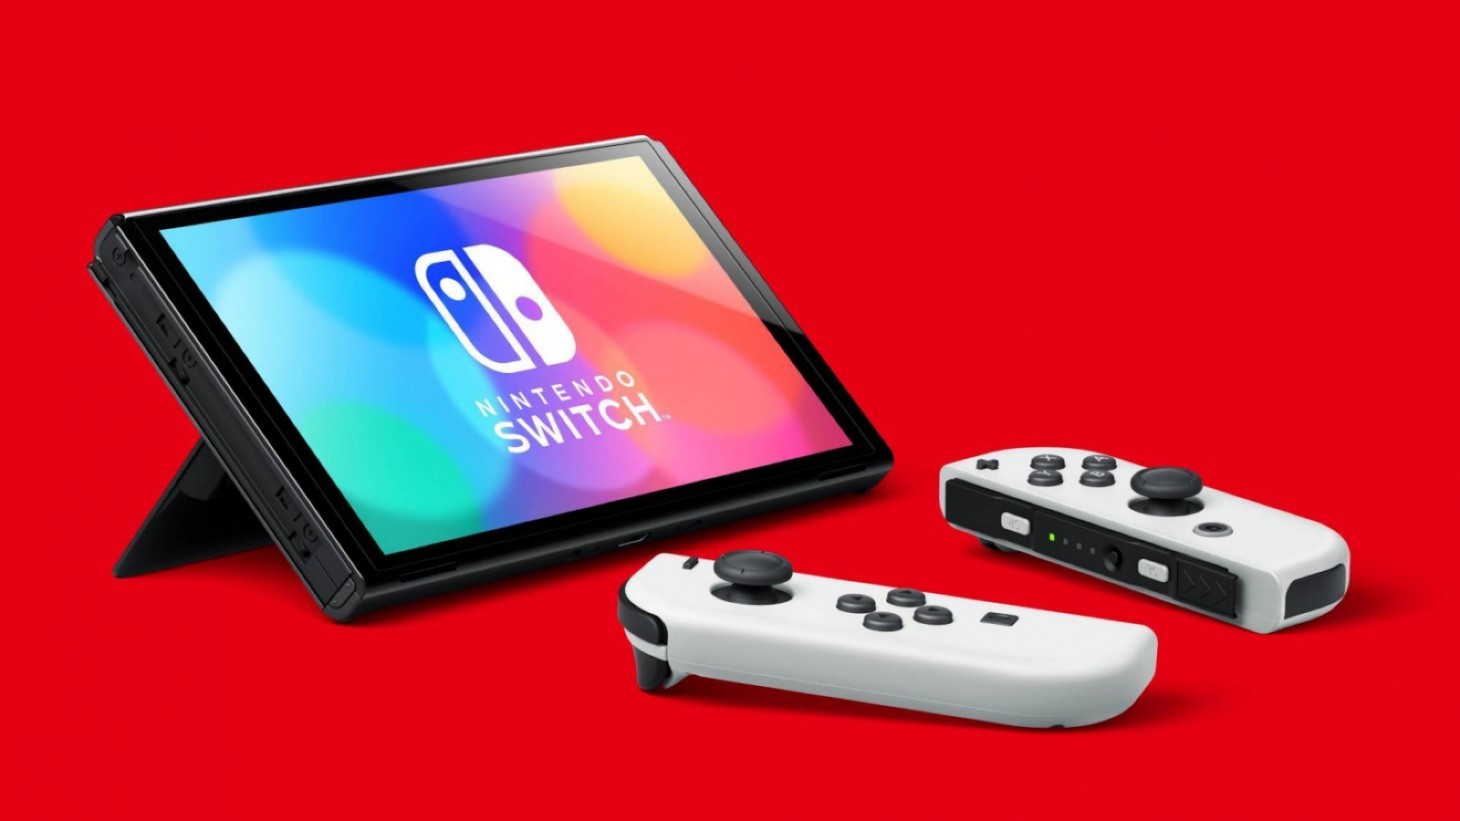 The Legend Of Zelda: Tears Of The Kingdom Switch OLED And Accessories  Revealed - Game Informer